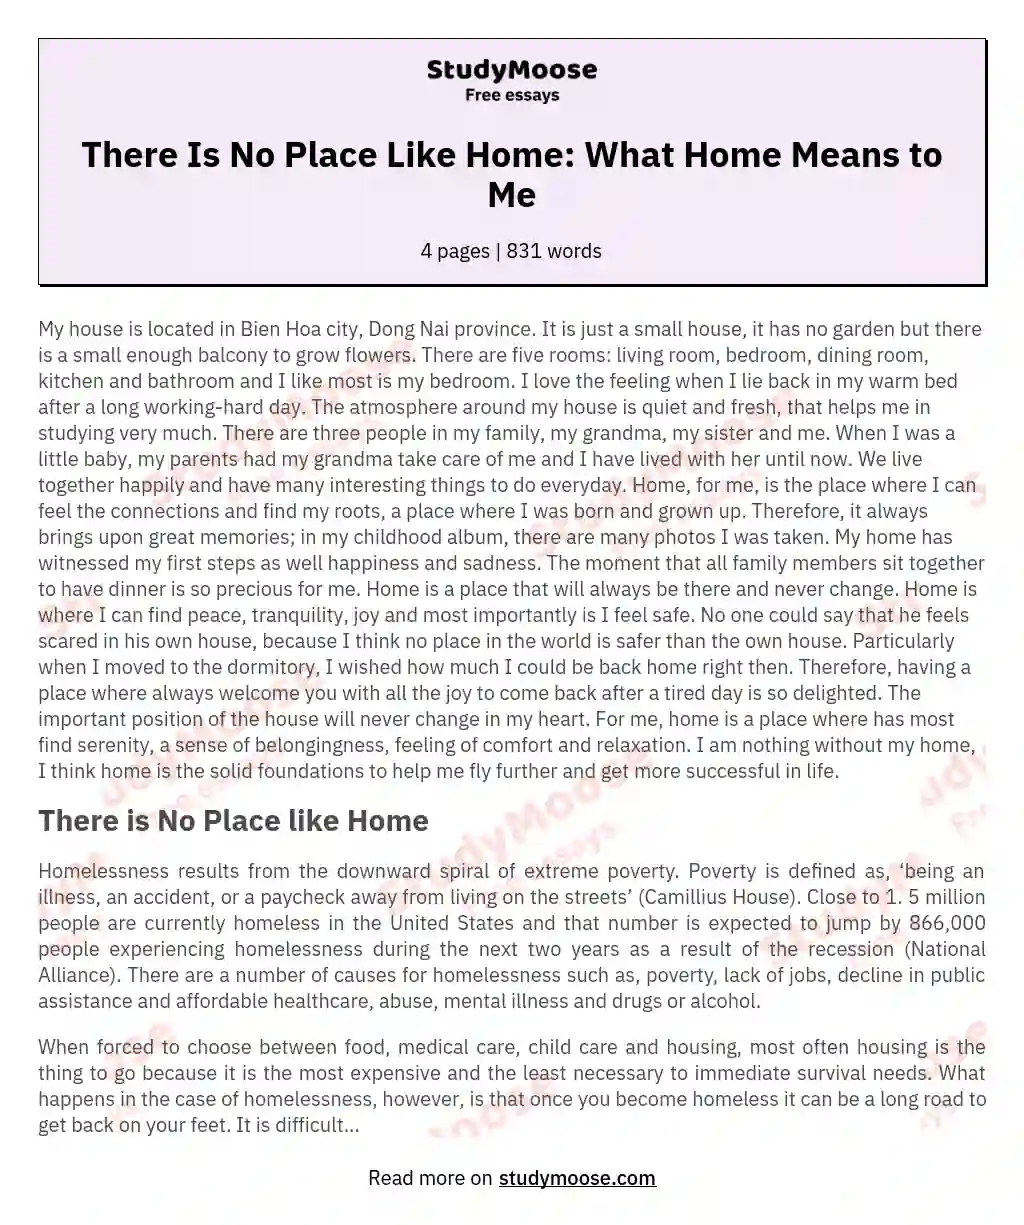 There Is No Place Like Home: What Home Means to Me